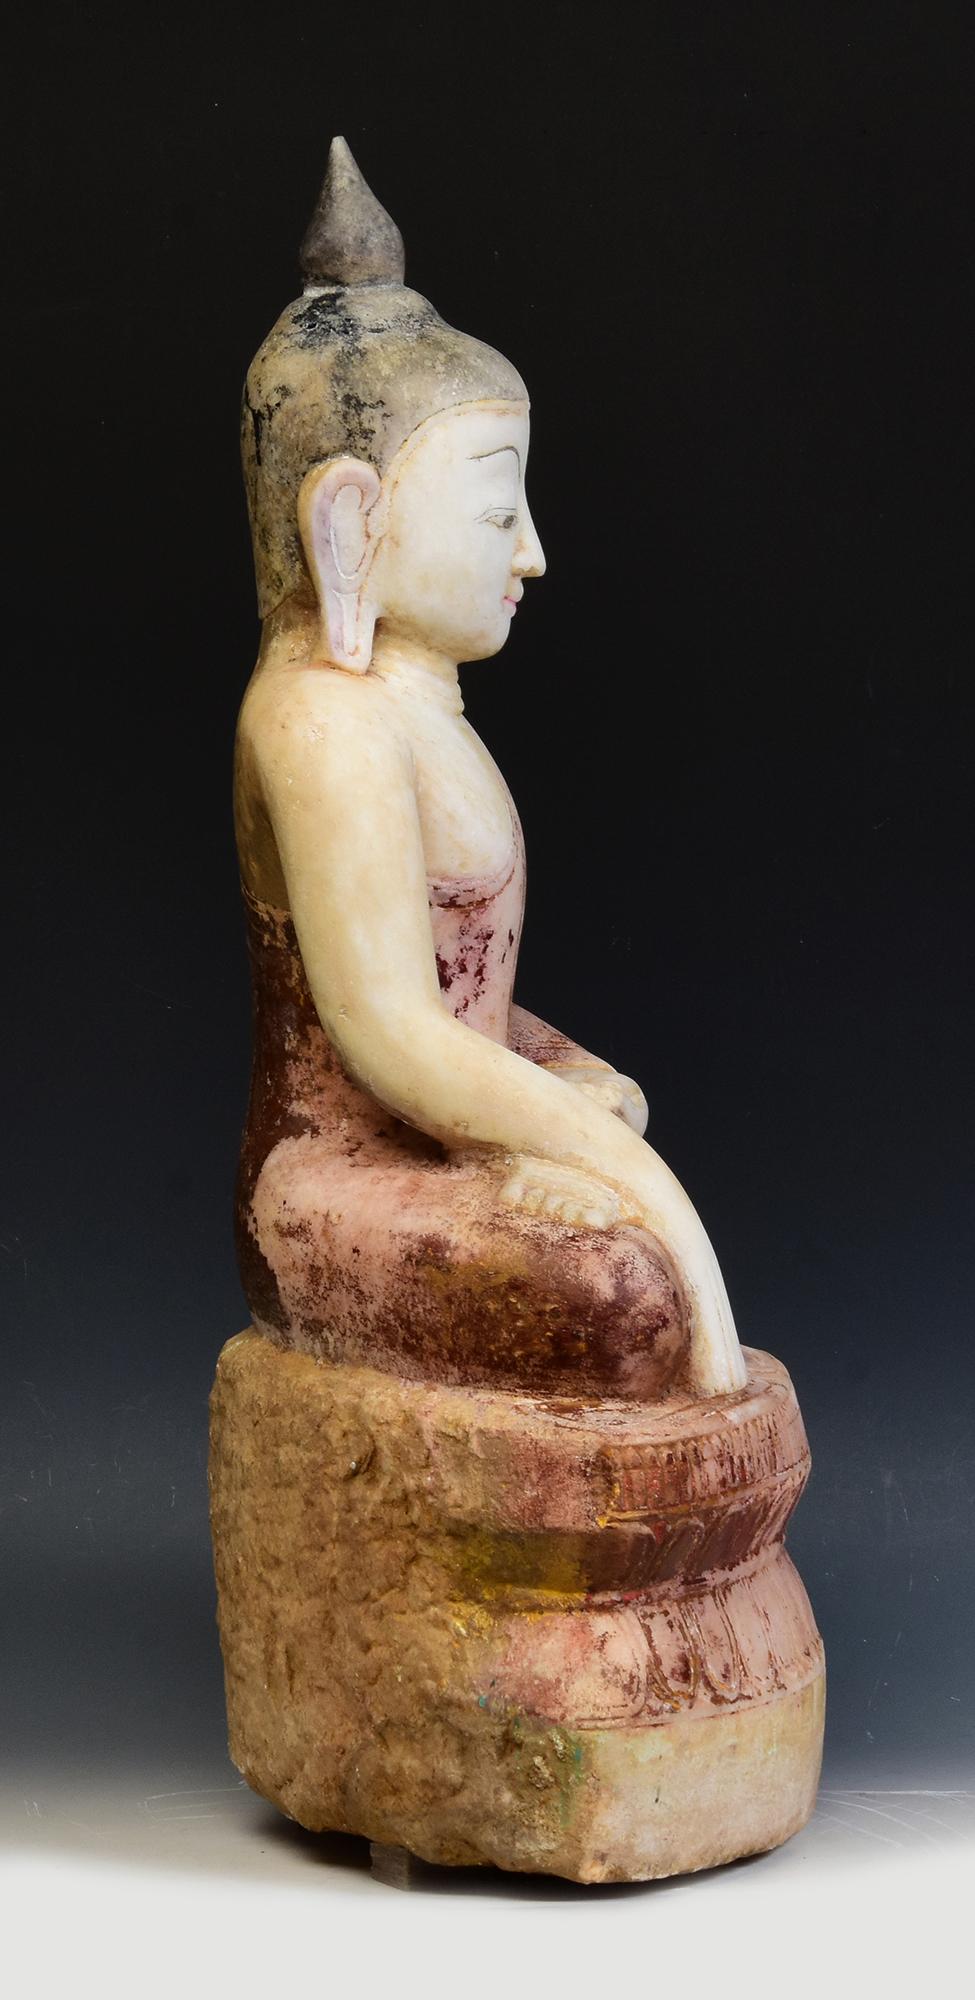 17th - 18th Century, Shan, Antique Burmese Alabaster Marble Seated Buddha Statue 7